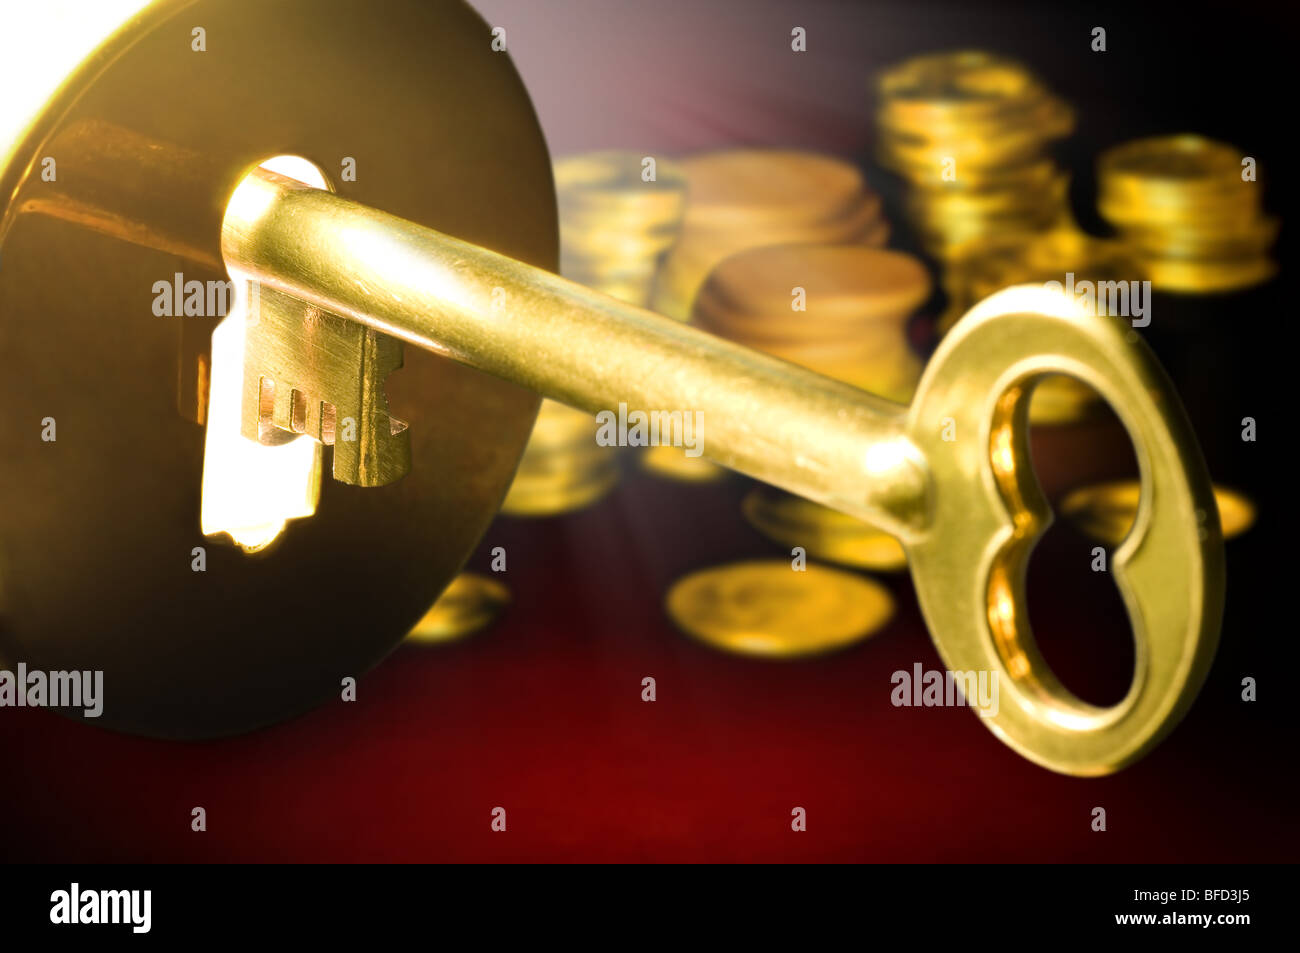 Golden key to the fortune with columns of coins in the background. Stock Photo